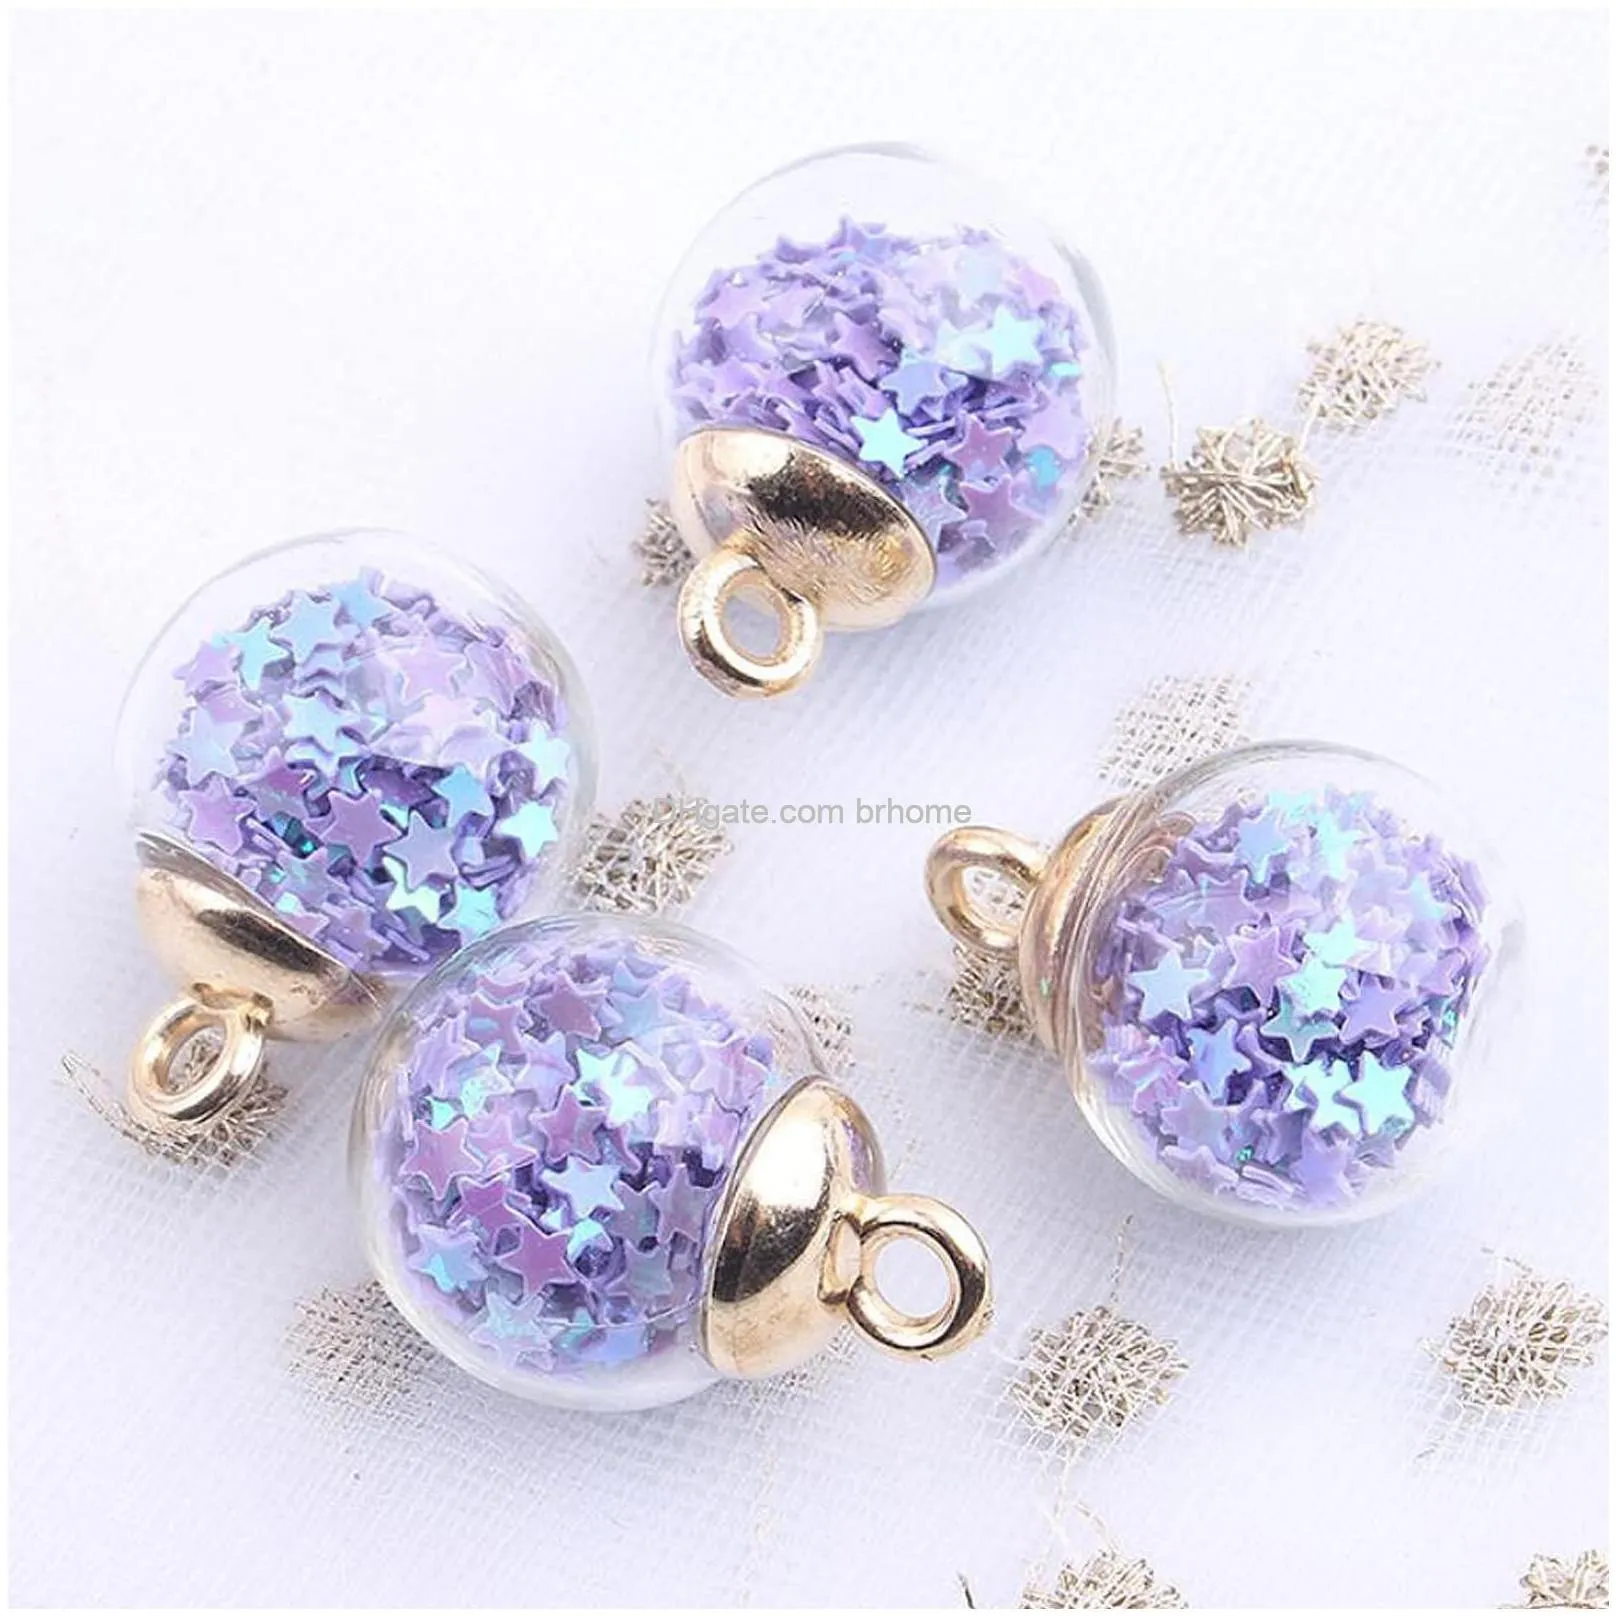 16mm glass ball charms colorful ball charm pendant with tiny stars for diy necklace bracelet earring jewelry making 16 color